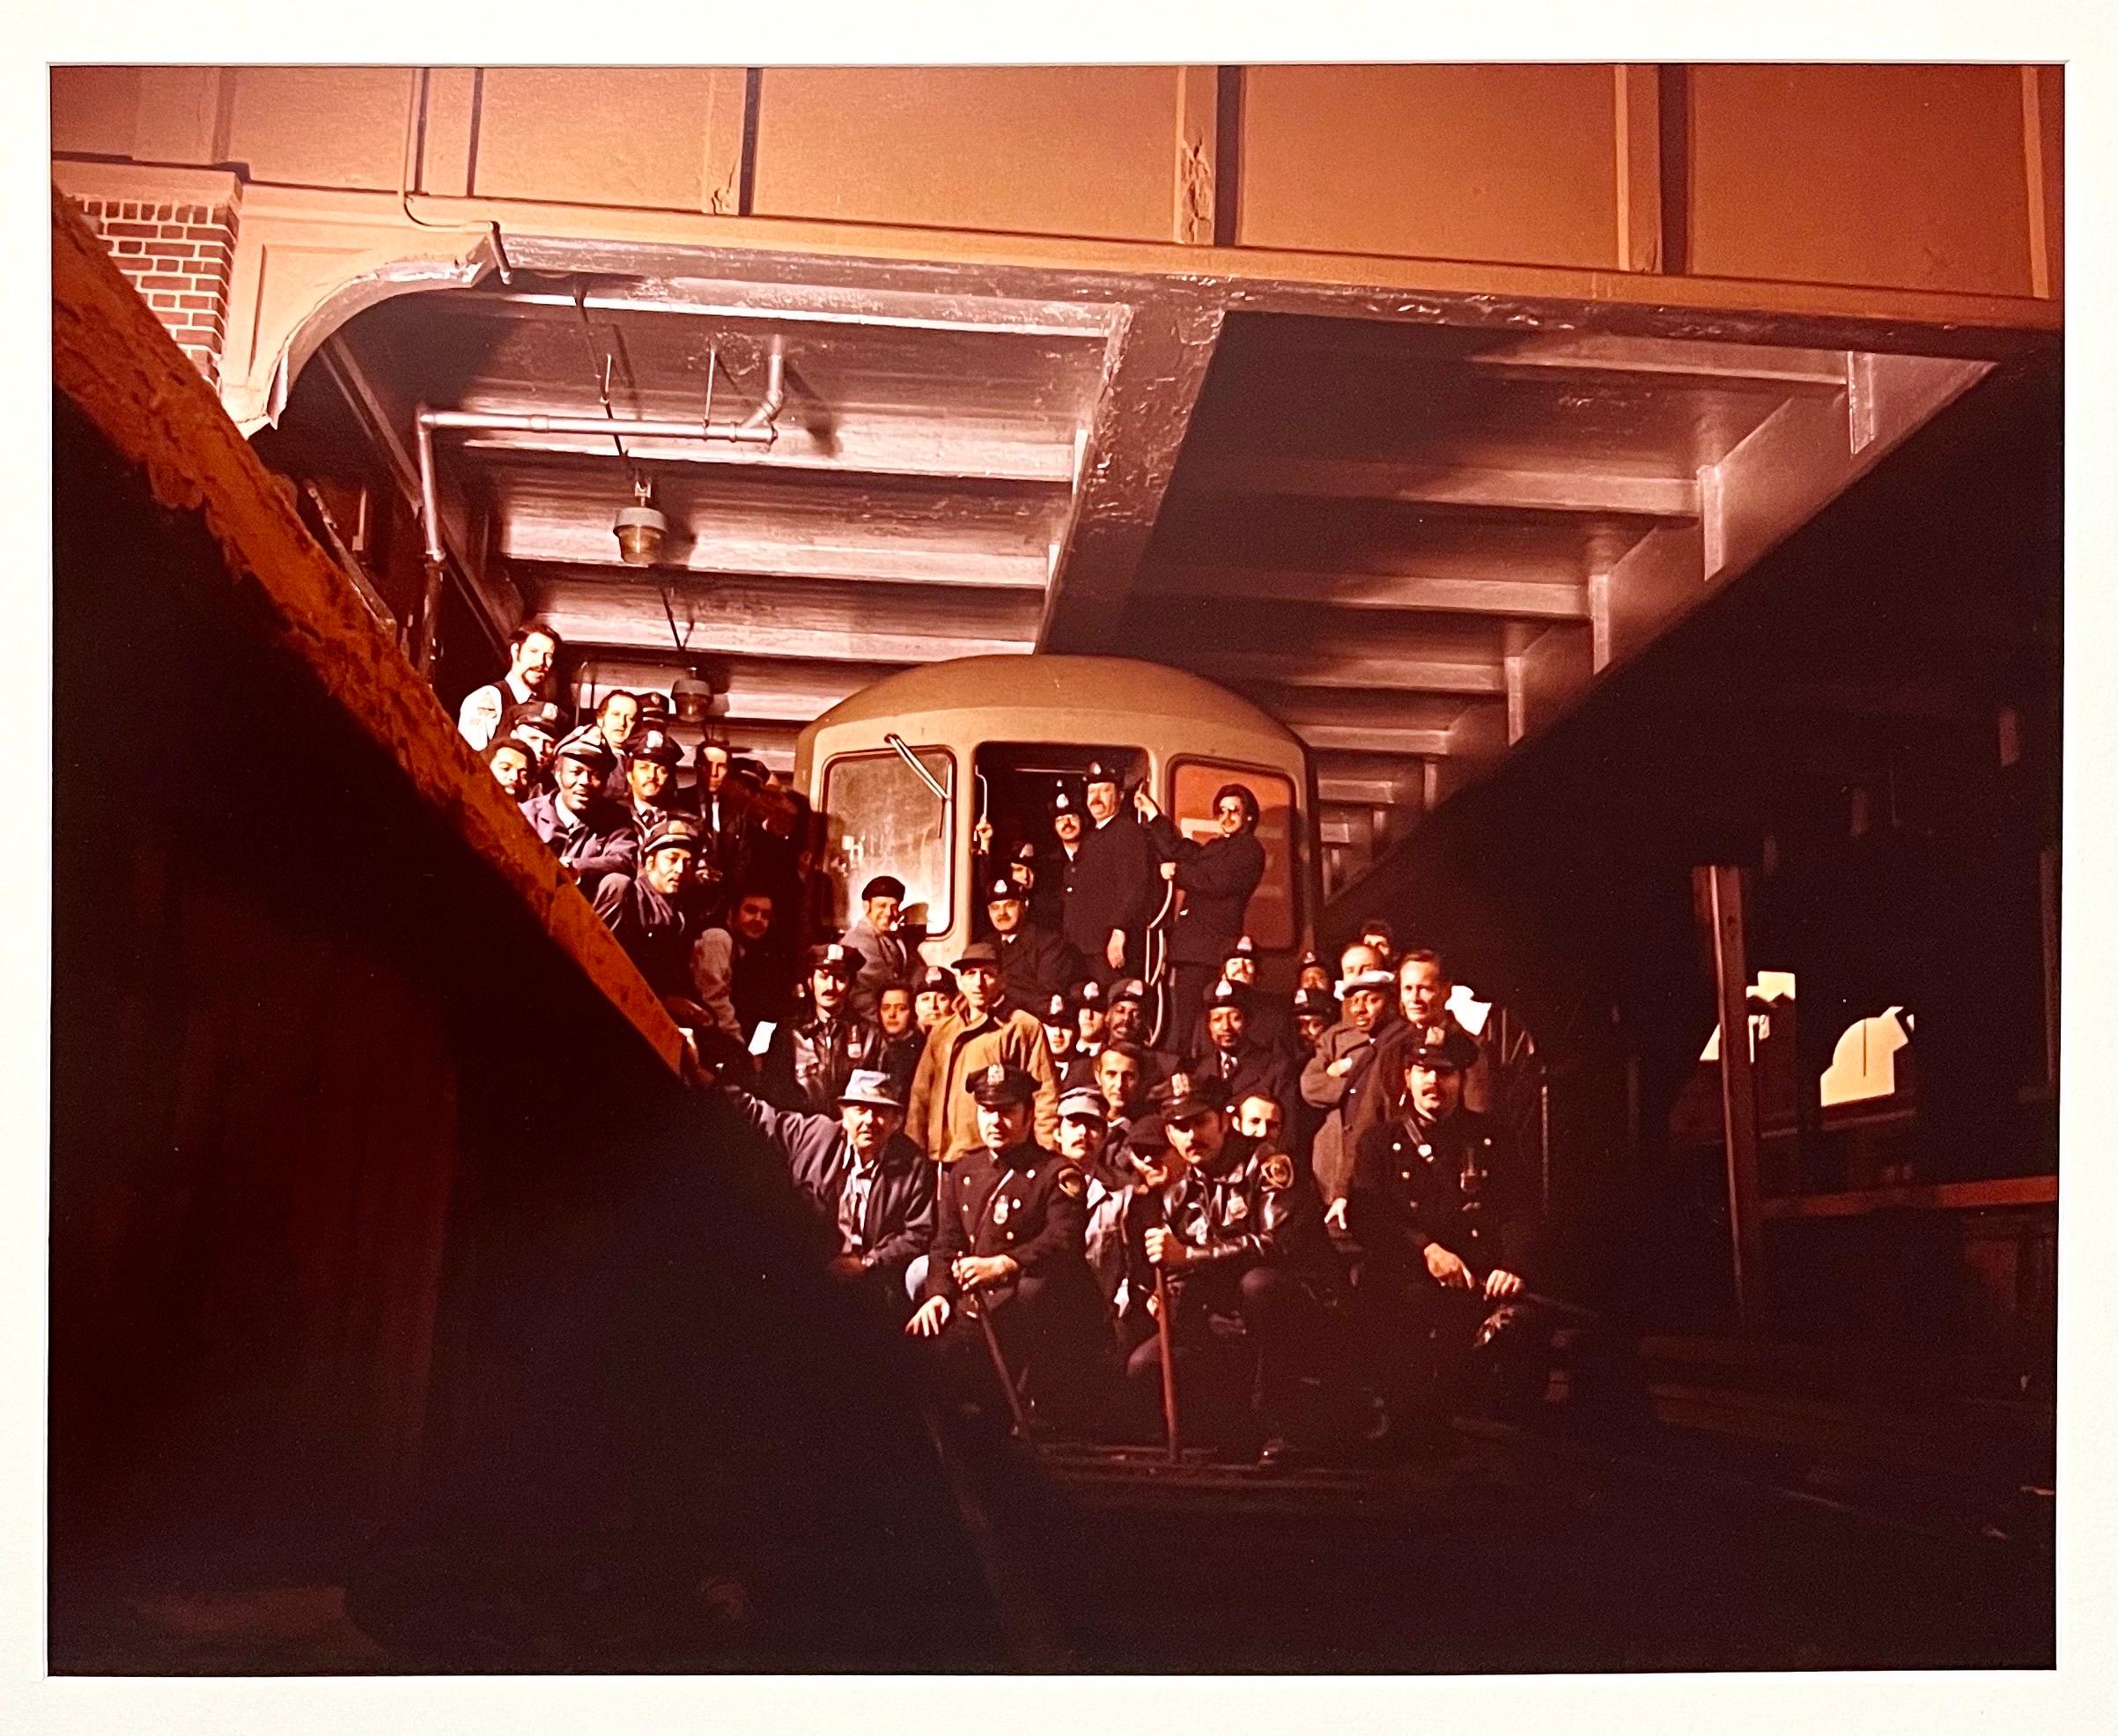 Neal Slavin (American, b. 1941)
New York City Transit Authority, Brooklyn, N.Y.
Subway workers
Vintage C-print [Chromogenic development print; Ektacolor prints]
Hand signed and numbered by the photographer 48/75
Photos made with 2.25 X 2.25